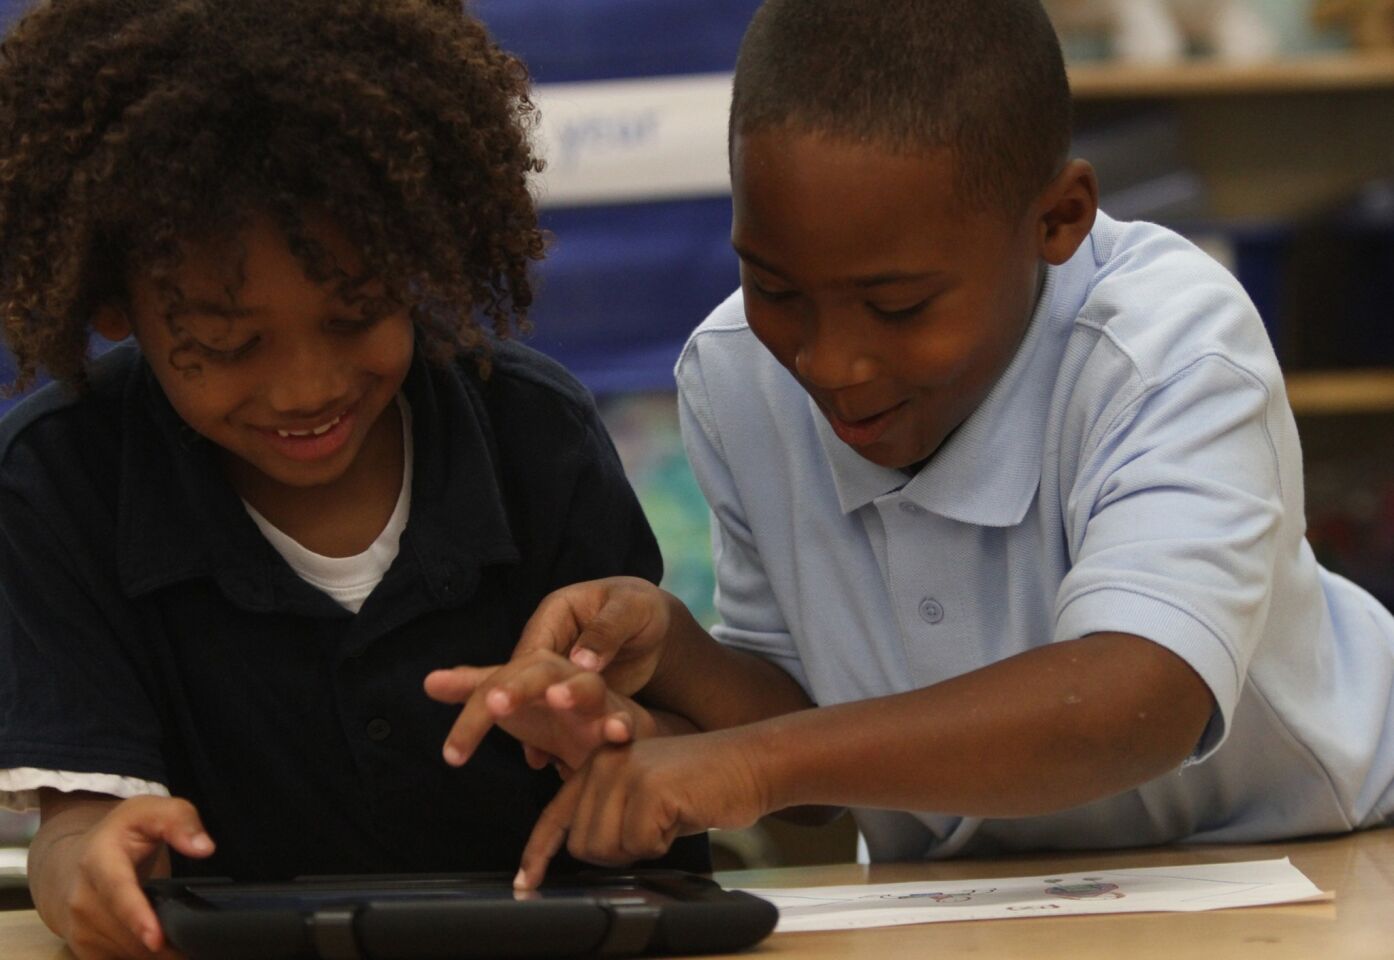 First iPads for LAUSD elementary school students